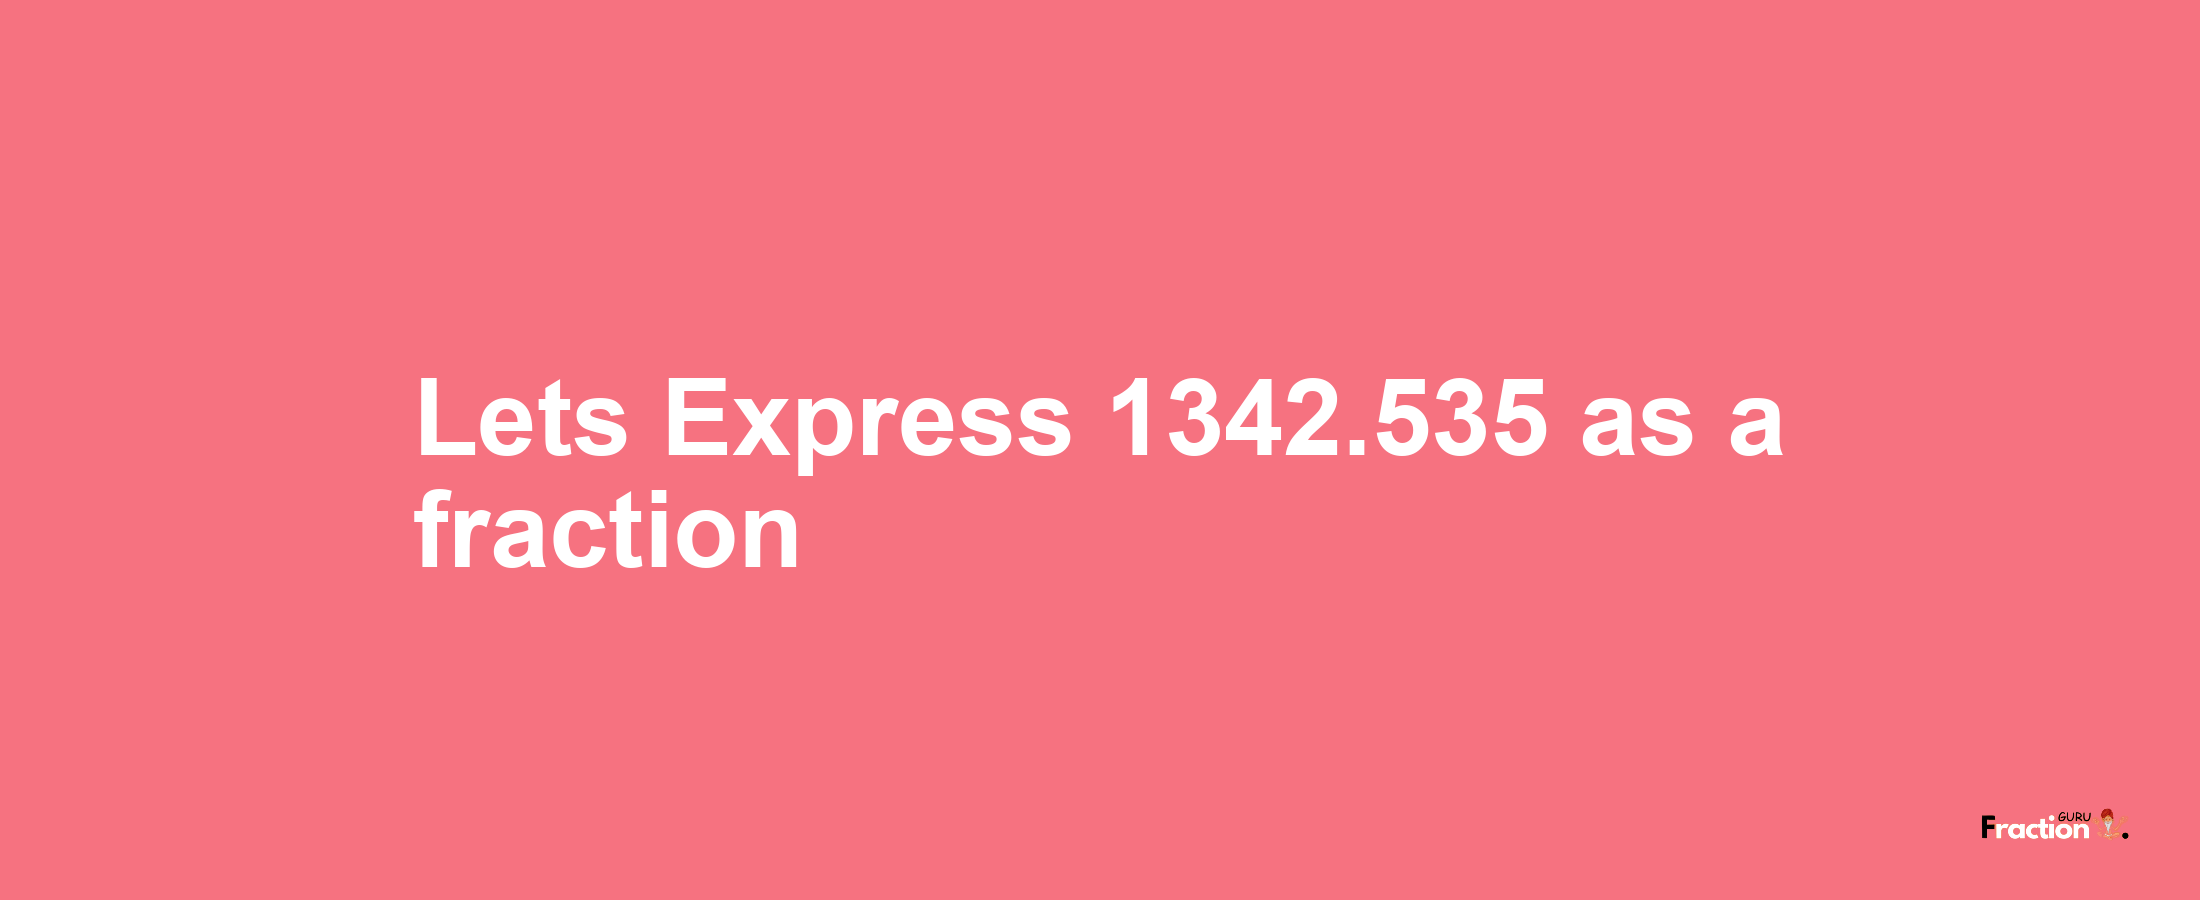 Lets Express 1342.535 as afraction